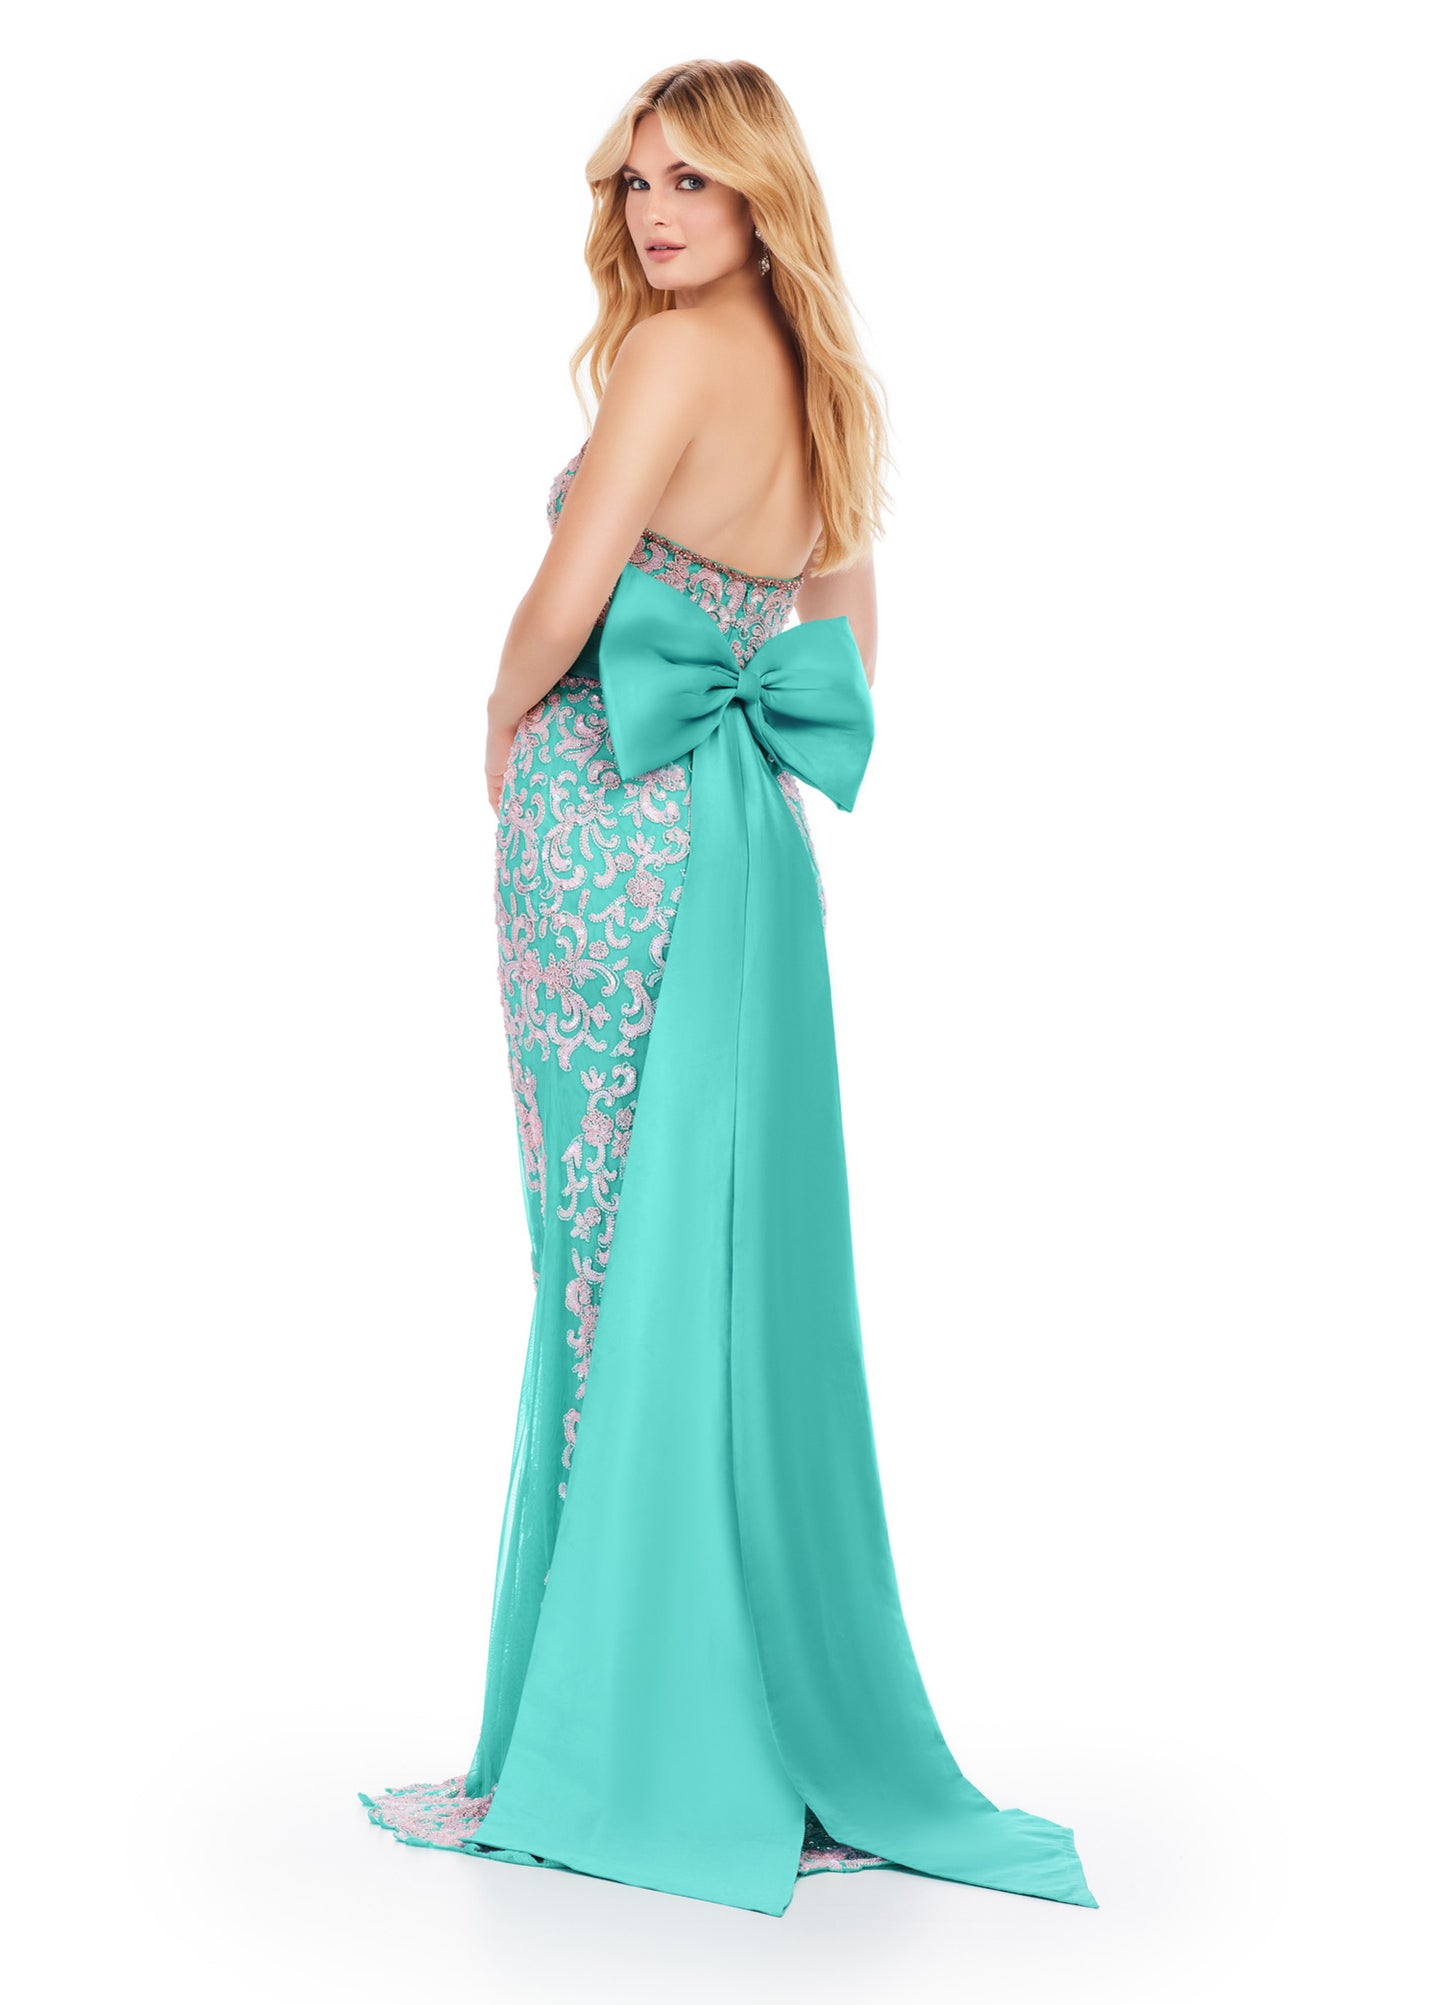 The Ashley Lauren 11583 Long Prom Dress is the perfect choice for any formal occasion. Its strapless design and fully beaded taffeta fabric create a stunning silhouette, while the included belt and bow add elegant finishing touches. Look and feel like a pageant queen in this exquisite gown. Who doesn't love a good bow moment? This strapless, fully beaded gown features an intricate beaded design and a taffeta belt and oversized bow.